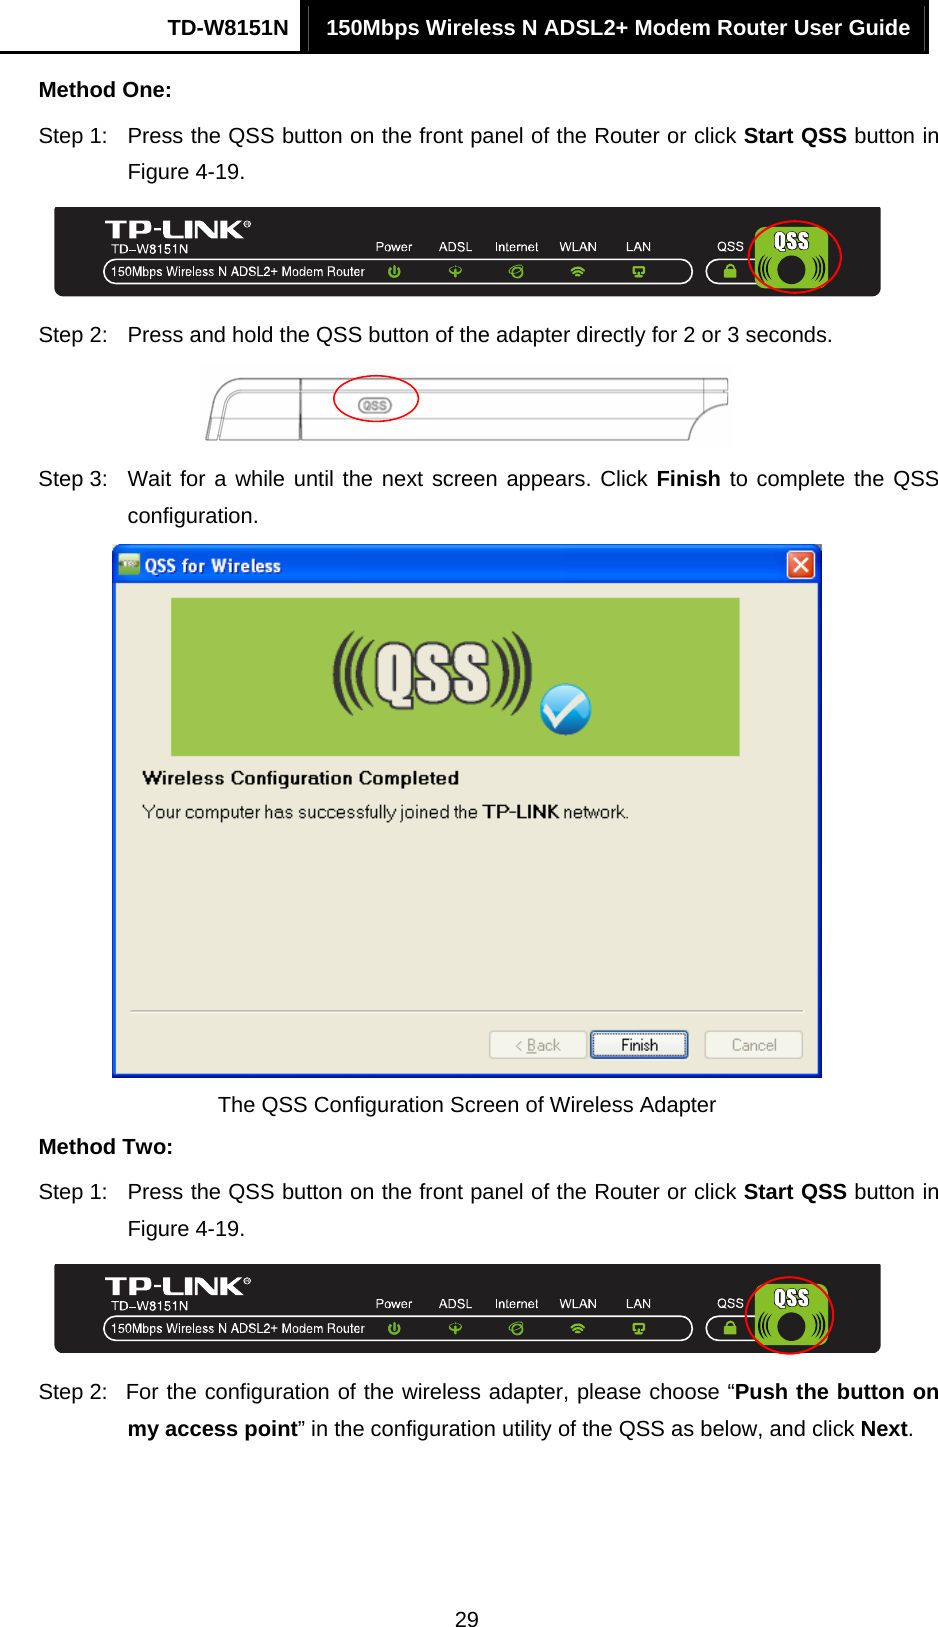 TD-W8151N  150Mbps Wireless N ADSL2+ Modem Router User Guide  29Method One: Step 1:  Press the QSS button on the front panel of the Router or click Start QSS button in Figure 4-19.  Step 2:  Press and hold the QSS button of the adapter directly for 2 or 3 seconds.  Step 3:  Wait for a while until the next screen appears. Click Finish to complete the QSS configuration.  The QSS Configuration Screen of Wireless Adapter   Method Two: Step 1:  Press the QSS button on the front panel of the Router or click Start QSS button in Figure 4-19.  Step 2:  For the configuration of the wireless adapter, please choose “Push the button on my access point” in the configuration utility of the QSS as below, and click Next.  